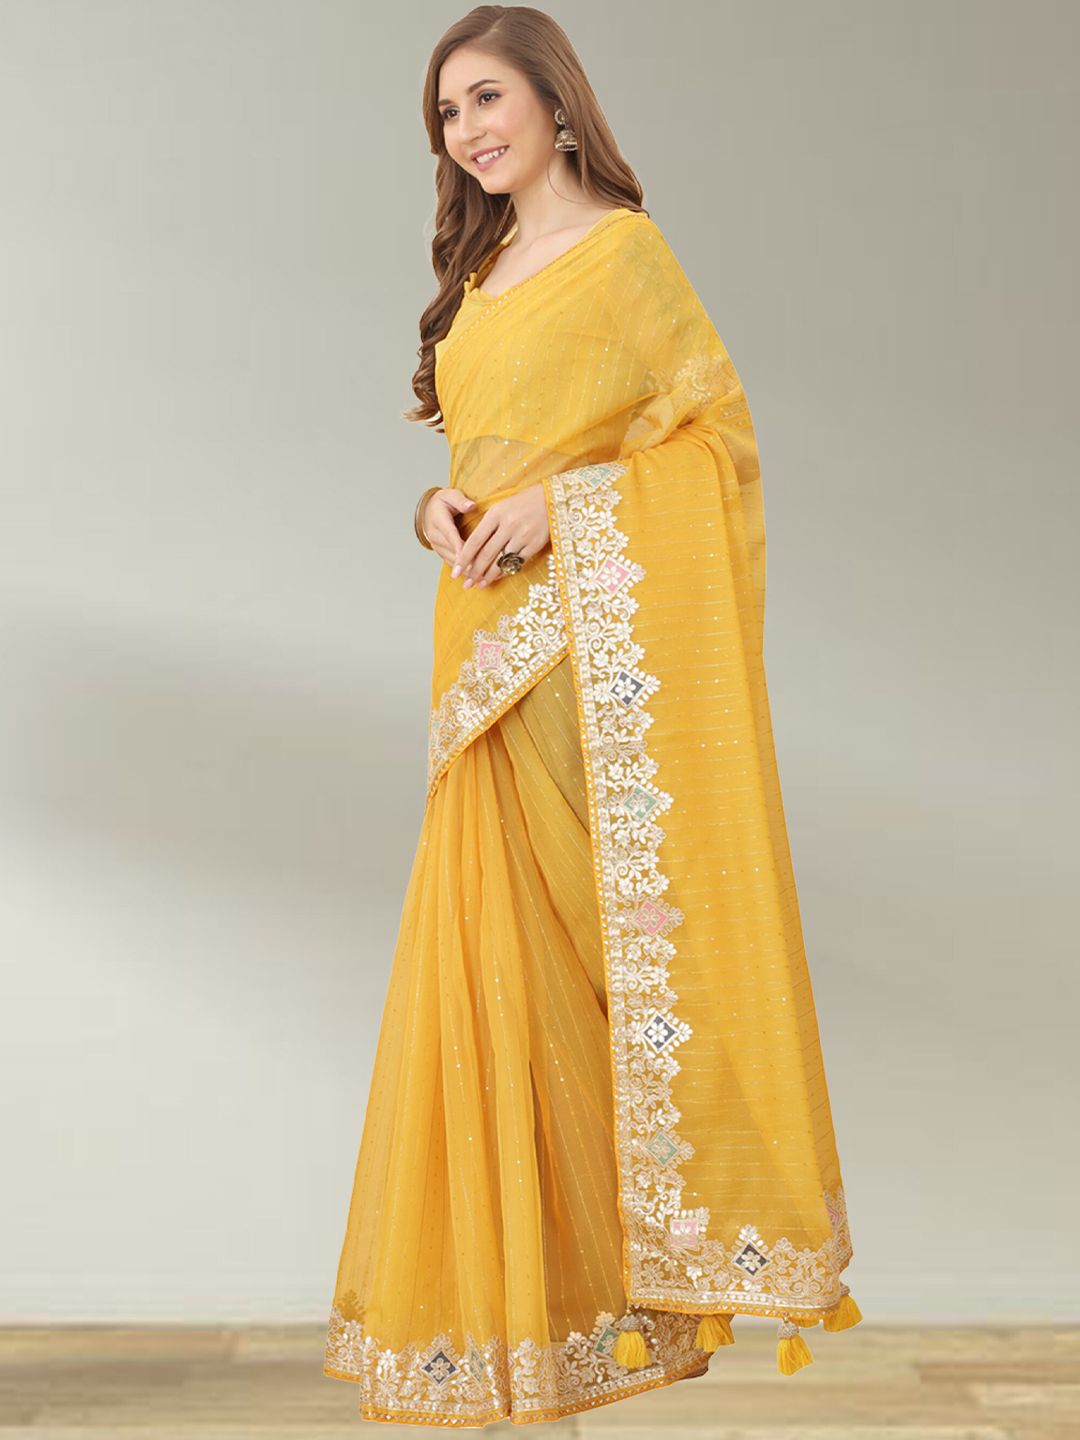 N N ENTERPRISE Yellow Embellished Sequinned Net Saree Price in India